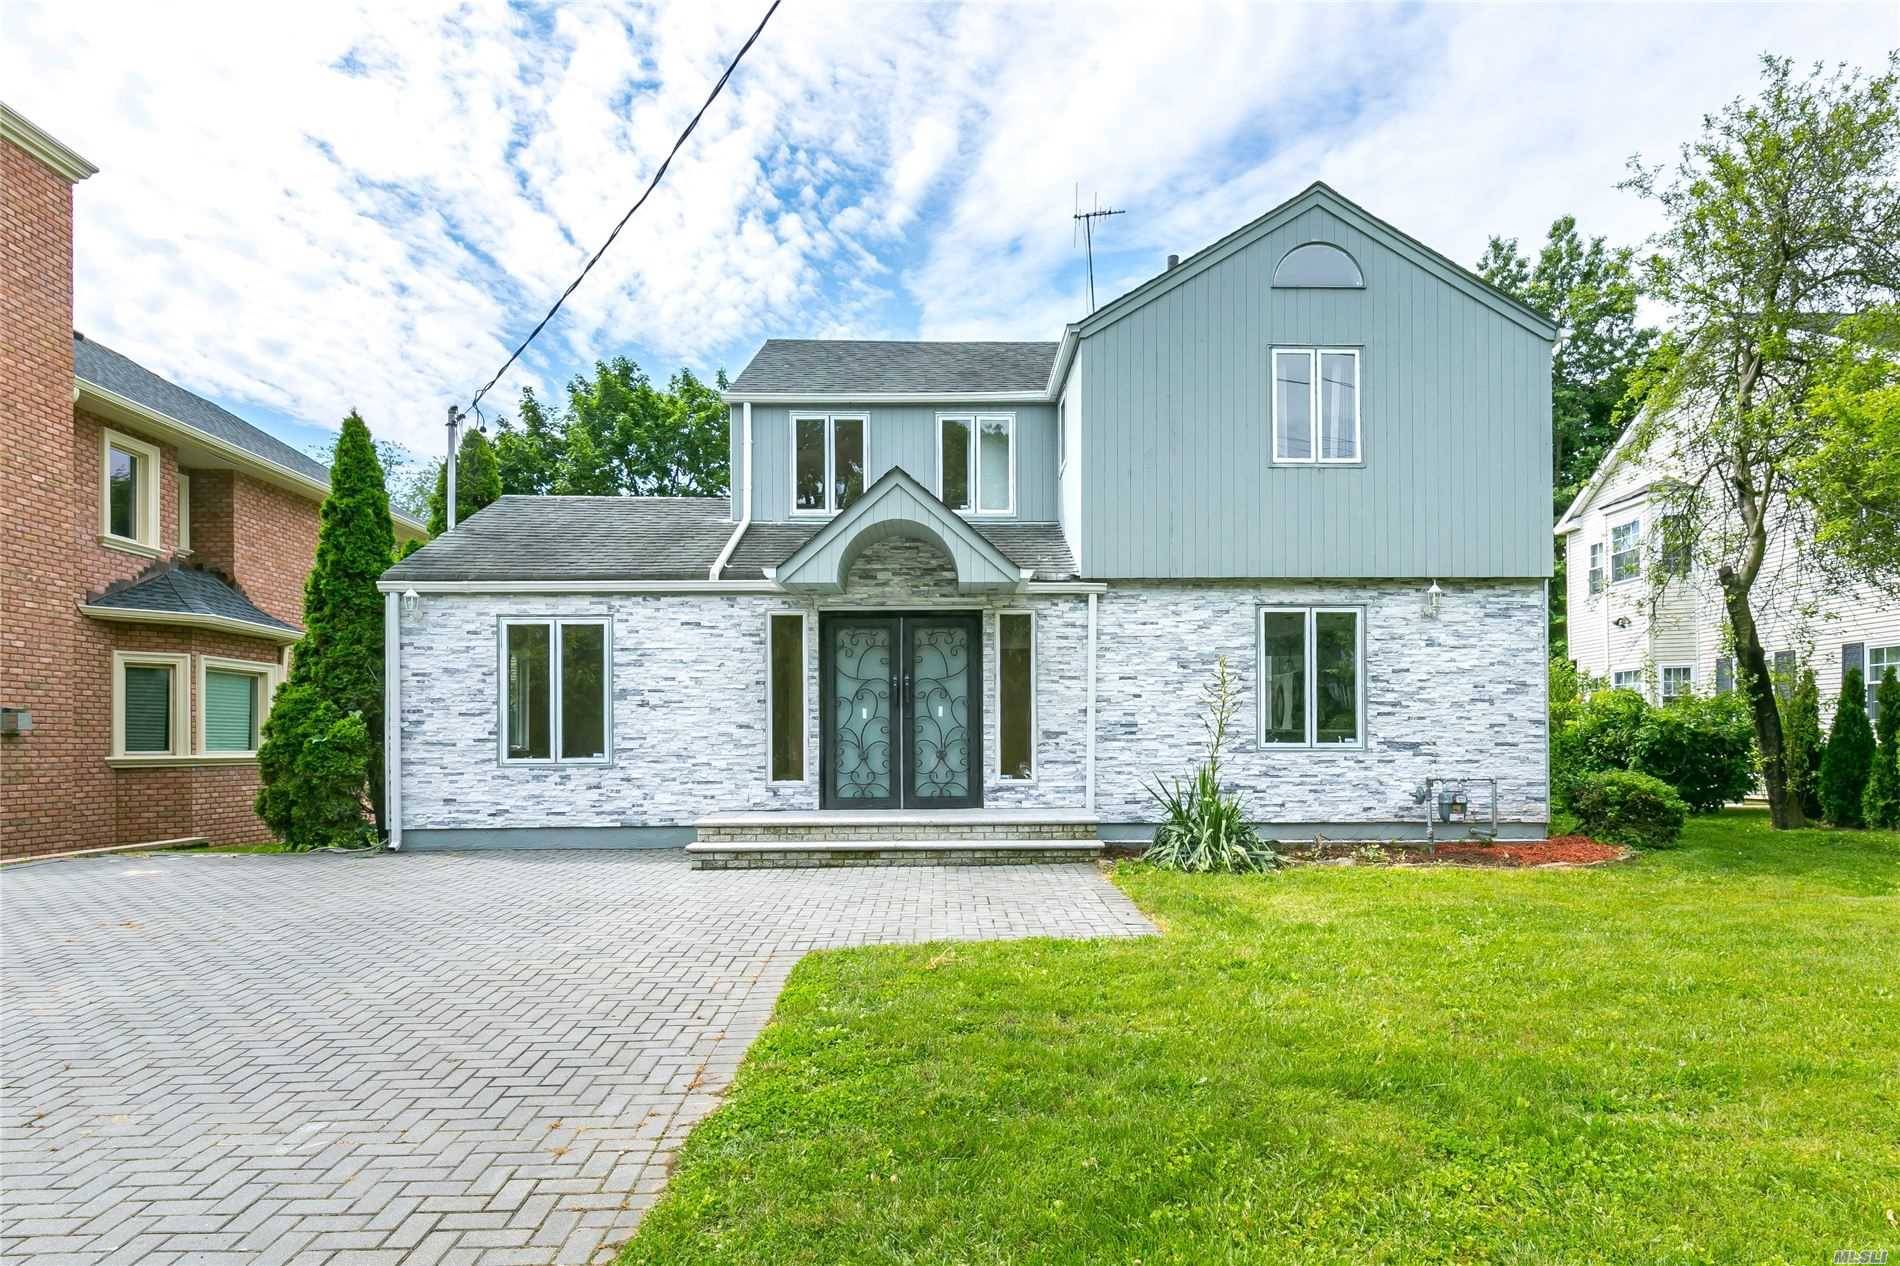 Move Right Into This Immaculate Fully Renovated Modern Colonial in The Desirable Great Neck School District.